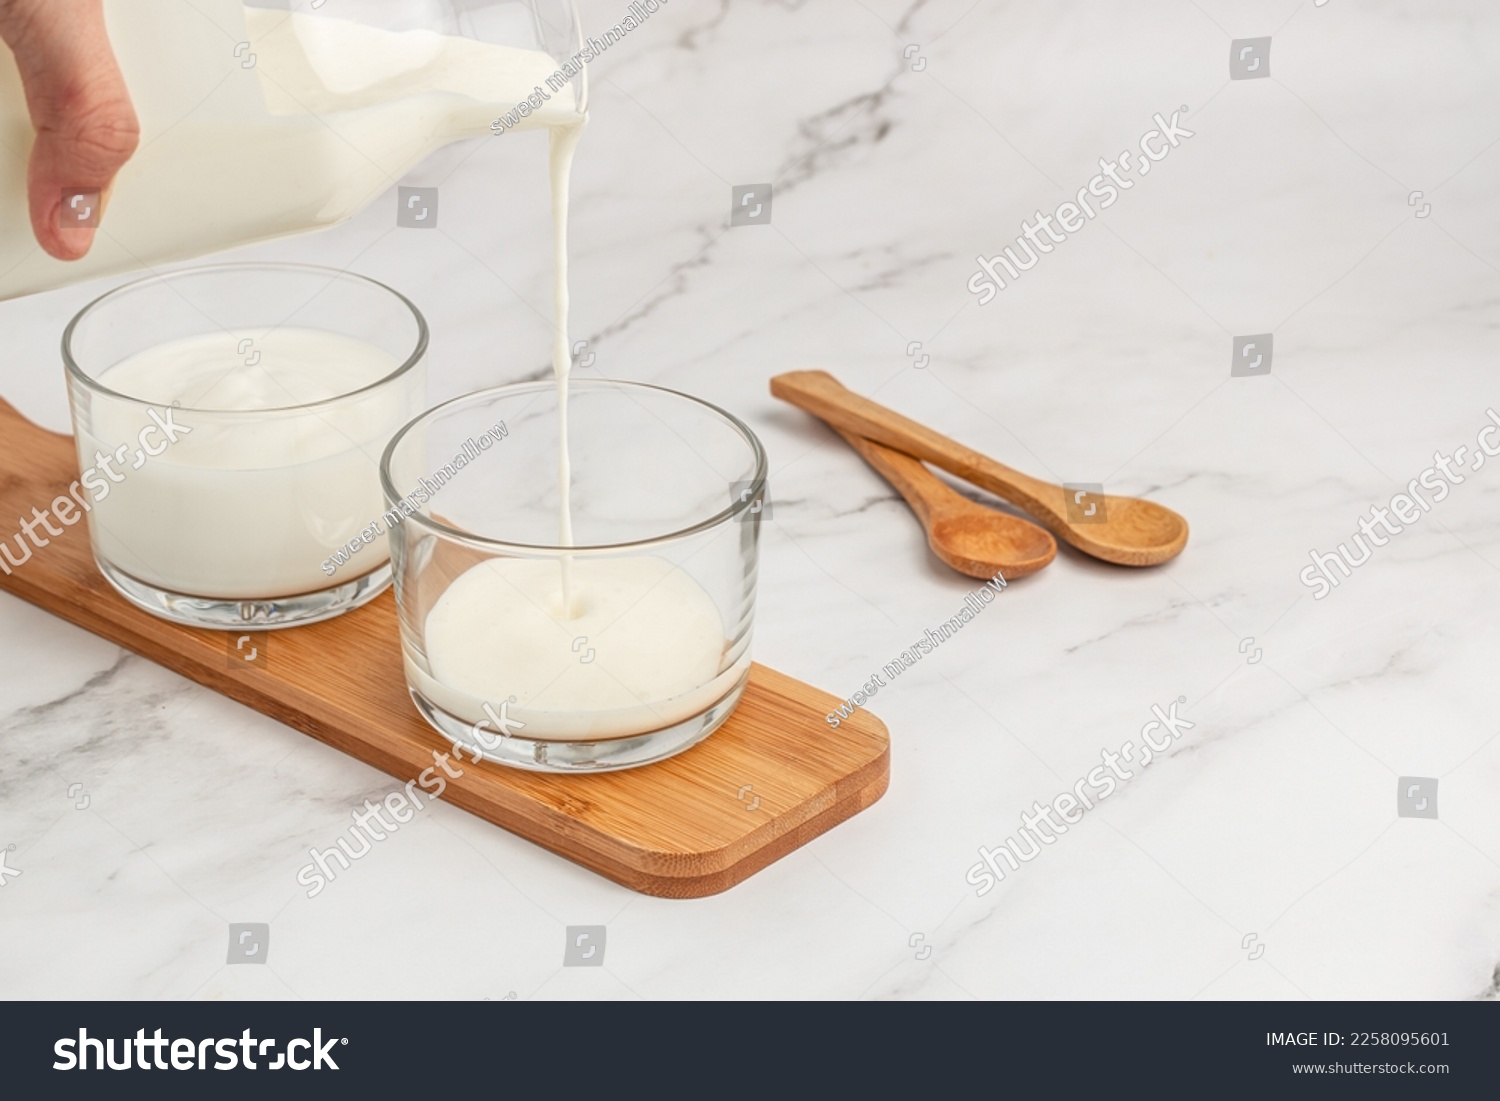 yogurt, kefir, fermented milk pouring into glass. Calcium rich diary product. banner, menu, recipe place for text, top view. #2258095601